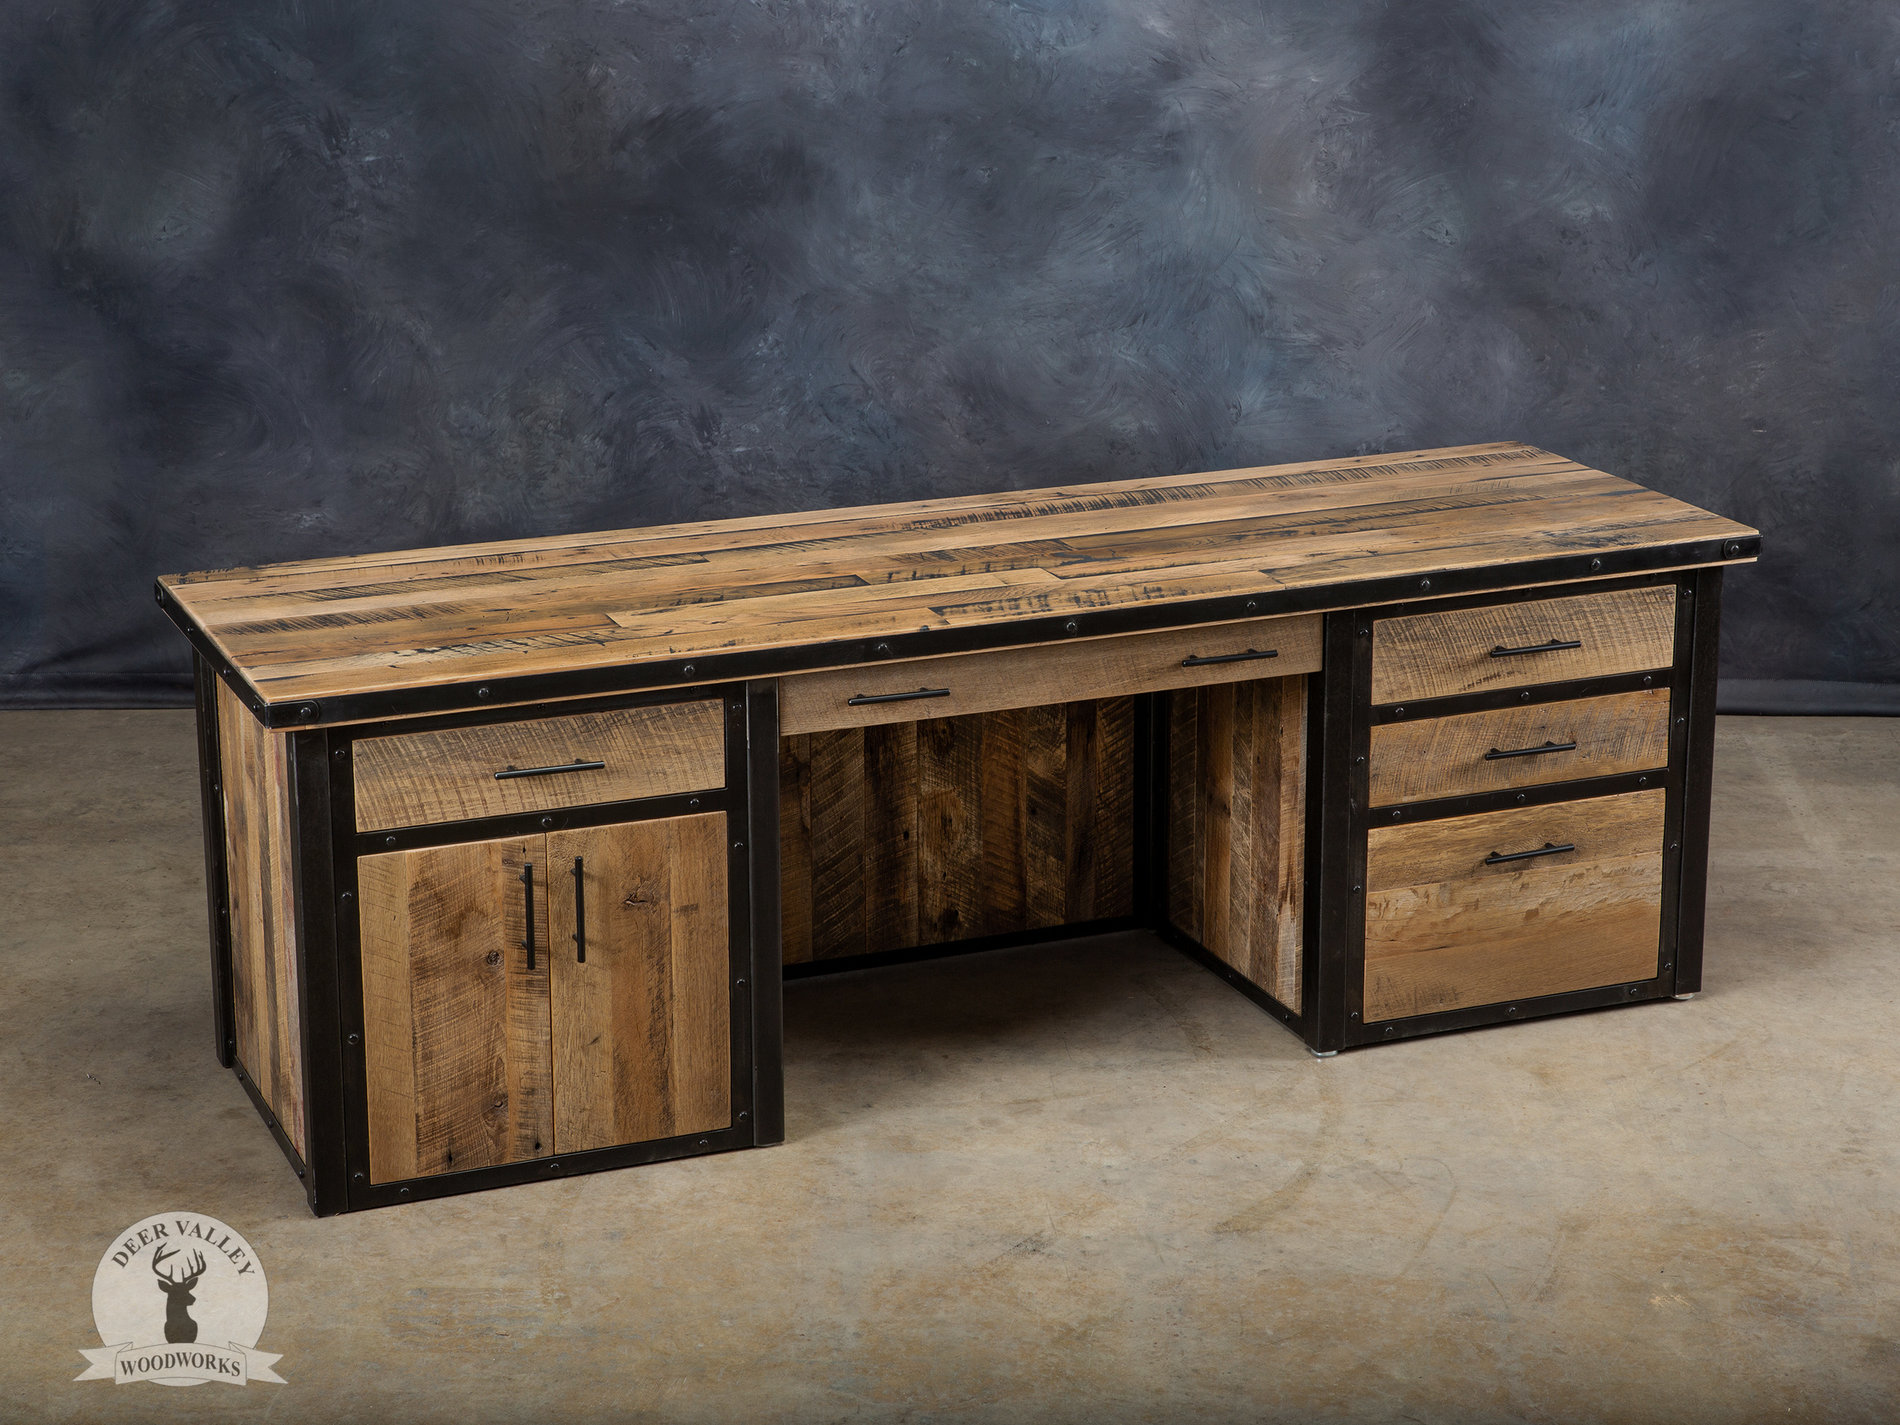 Industrial executive barnwood office desk has a large desktop rapped in an antiqued steel strapping and secured with welded steel rivets, privacy panels, a center drawer, three storage drawers, a file drawer and double door storage cabinet all surrounded by a blackened welded metal frame.